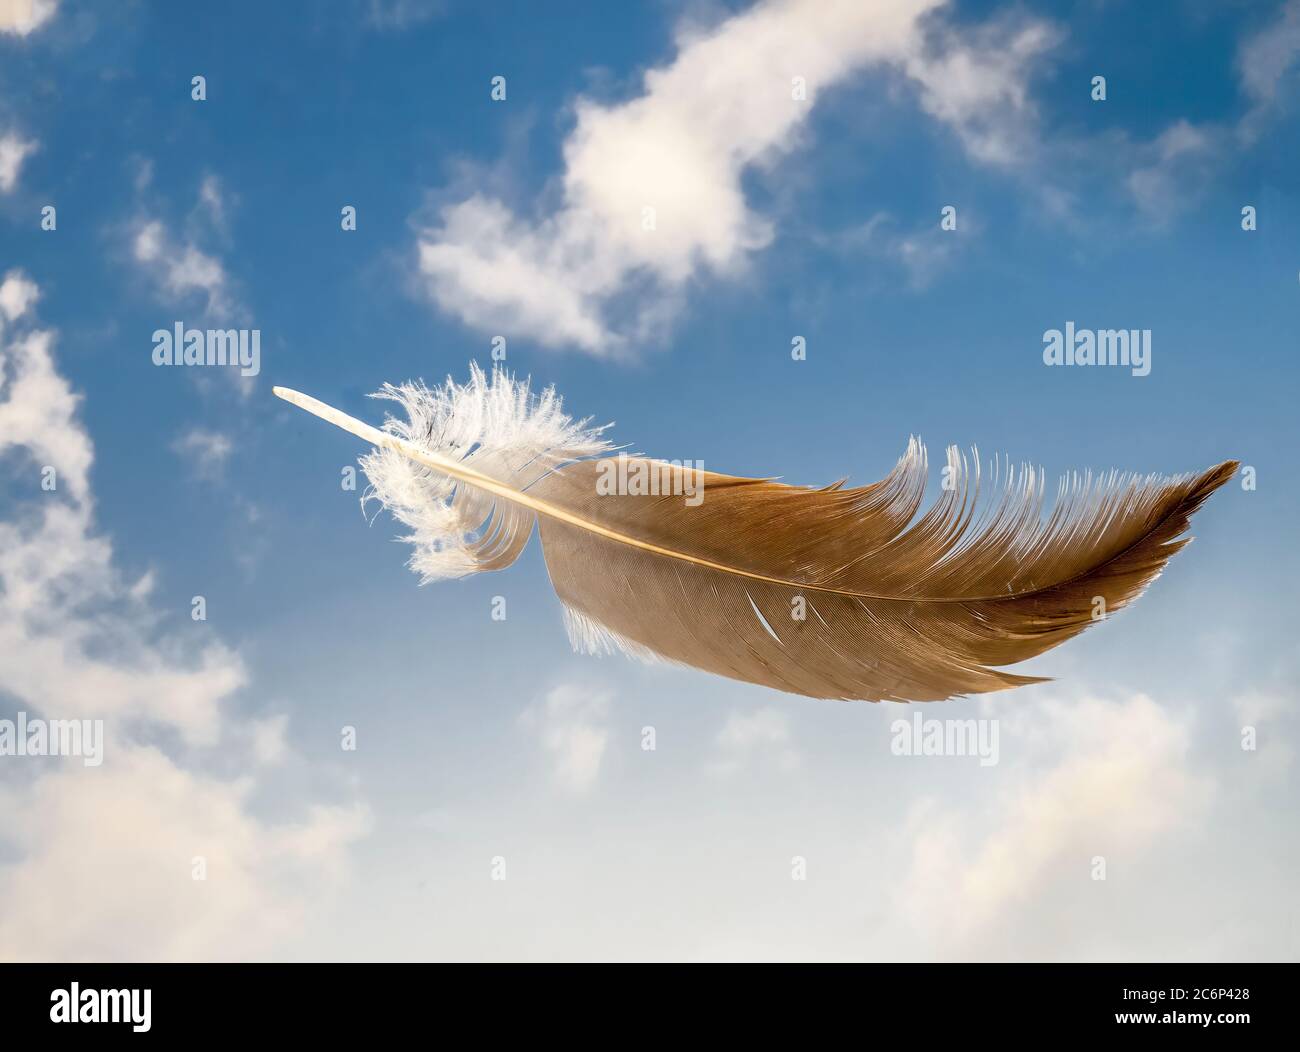 Single feather floating in air with blue sky and white clouds in background Stock Photo